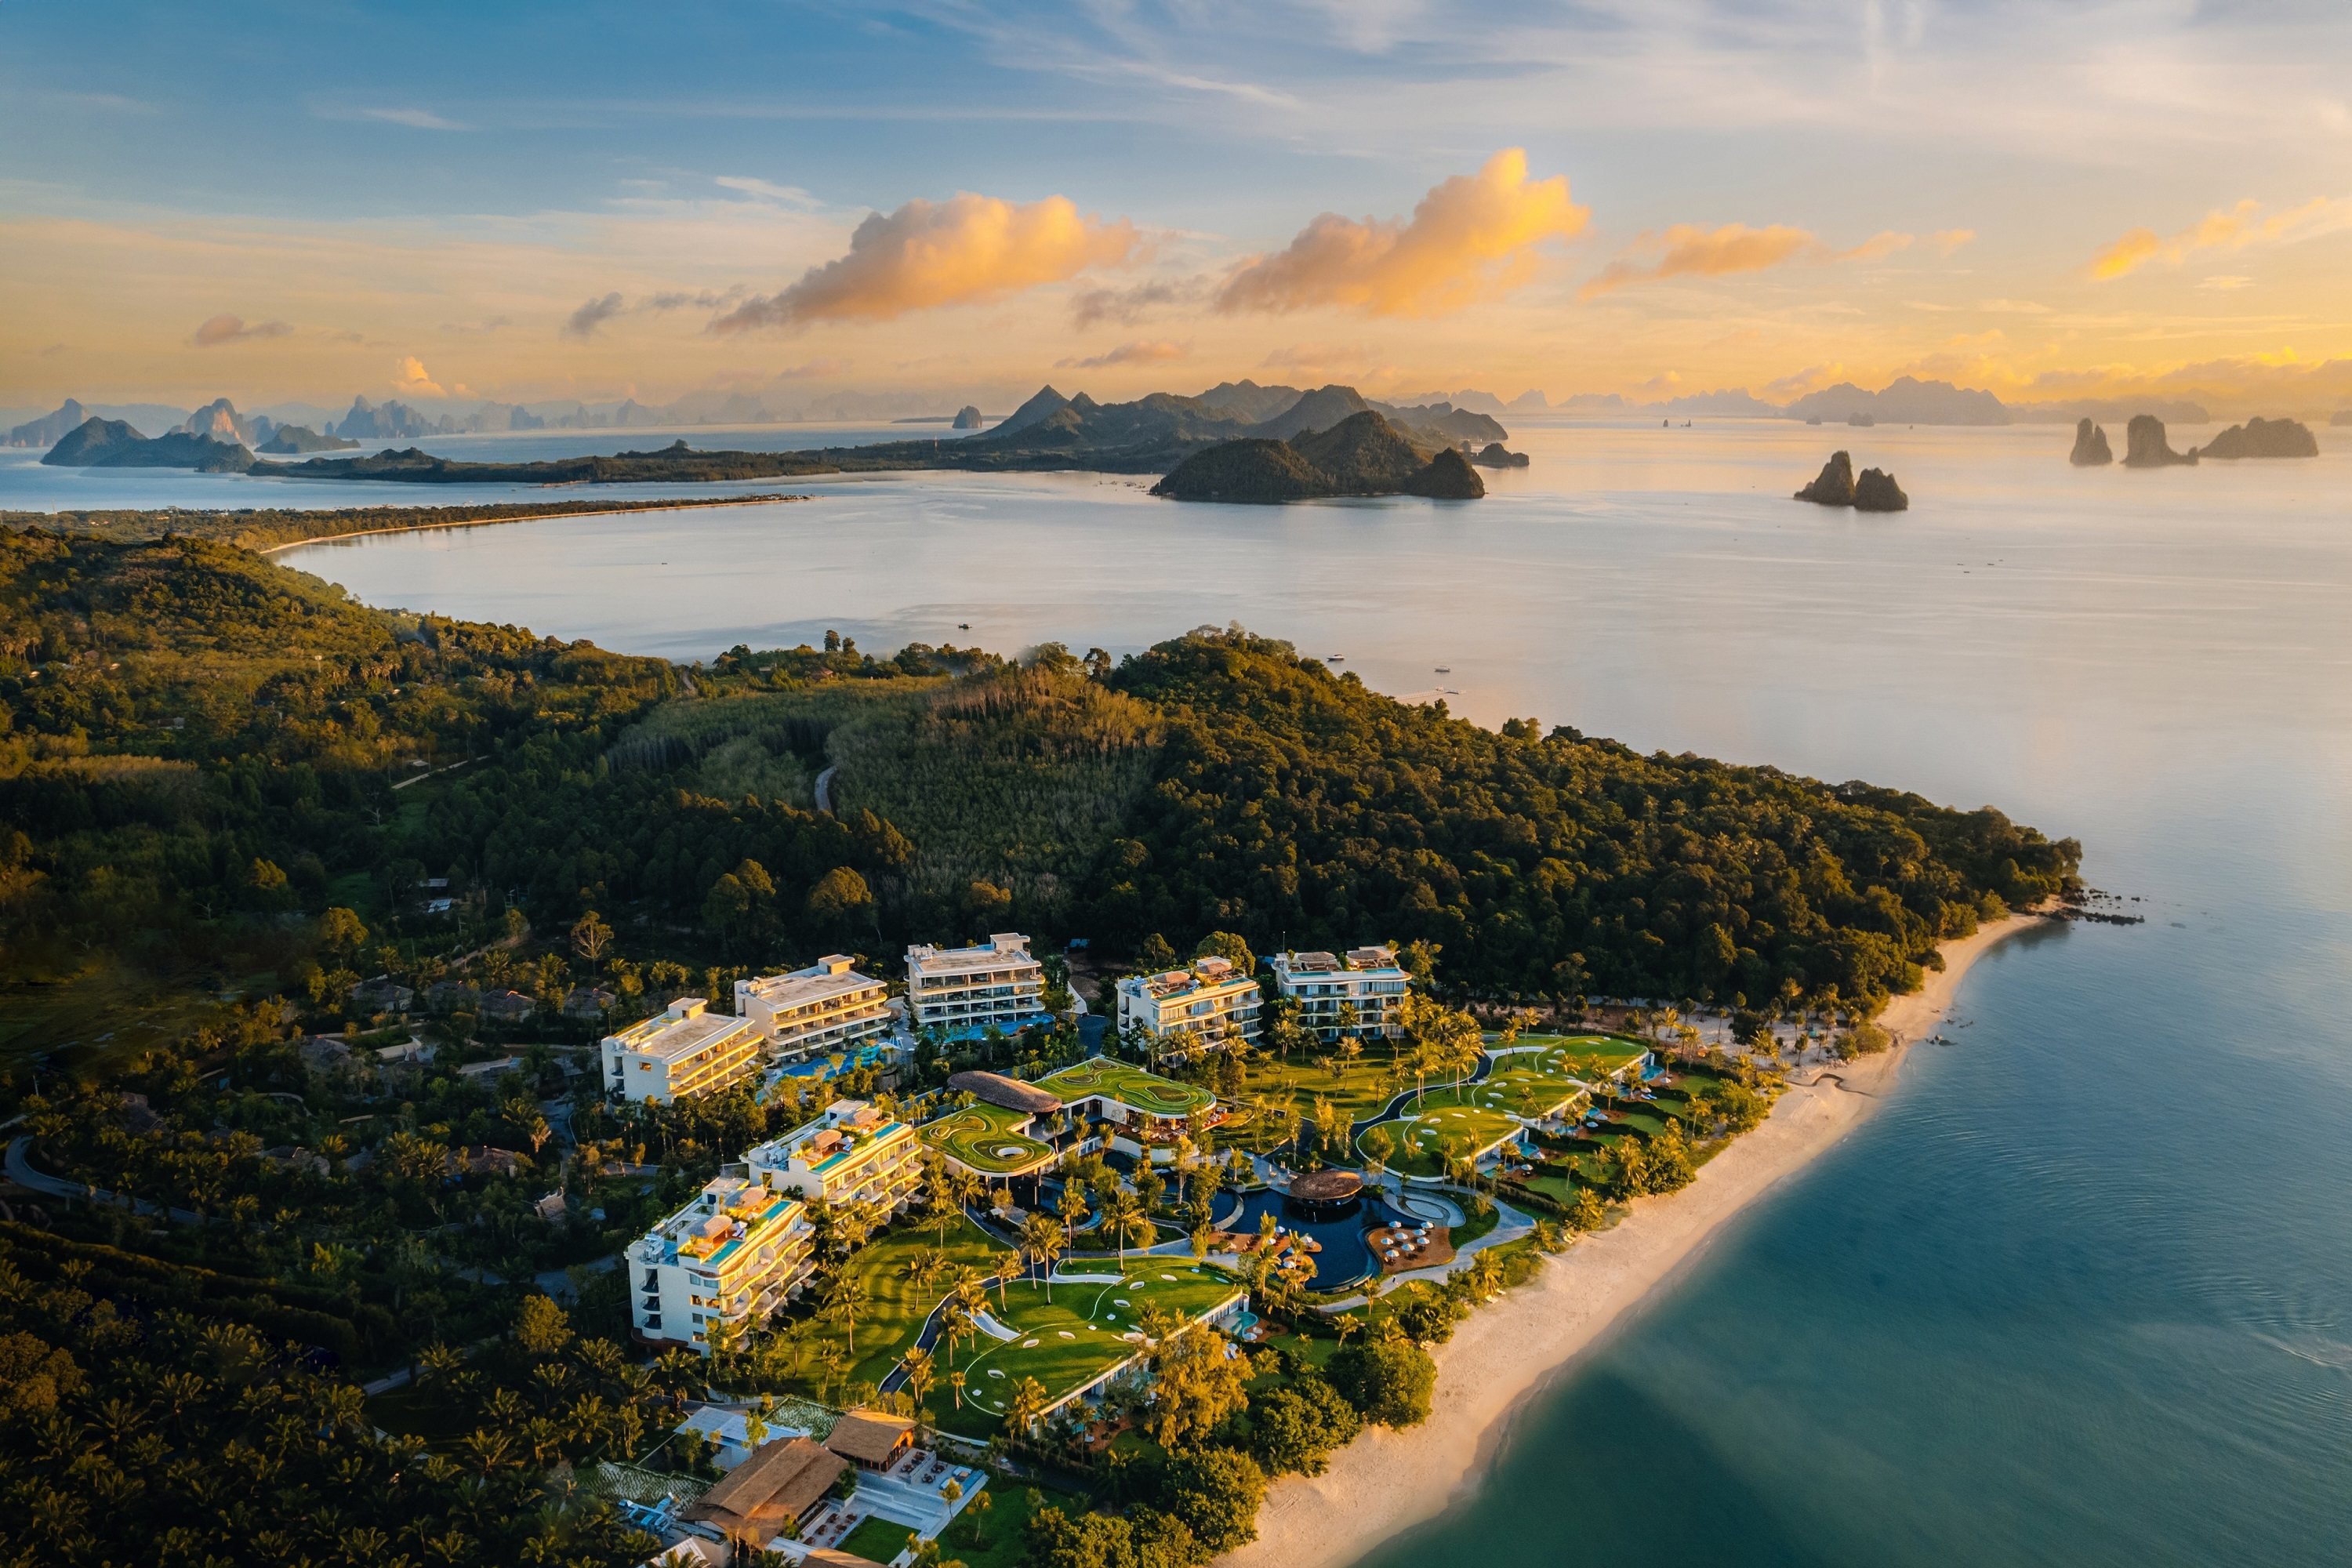 Is Anantara Koh Yao Yai Resort & Villas the hottest new destination in  Thailand? A 20-minute boat ride from Krabi, the luxury hotel features  unspoilt views of Phang Nga Bay and sprawling